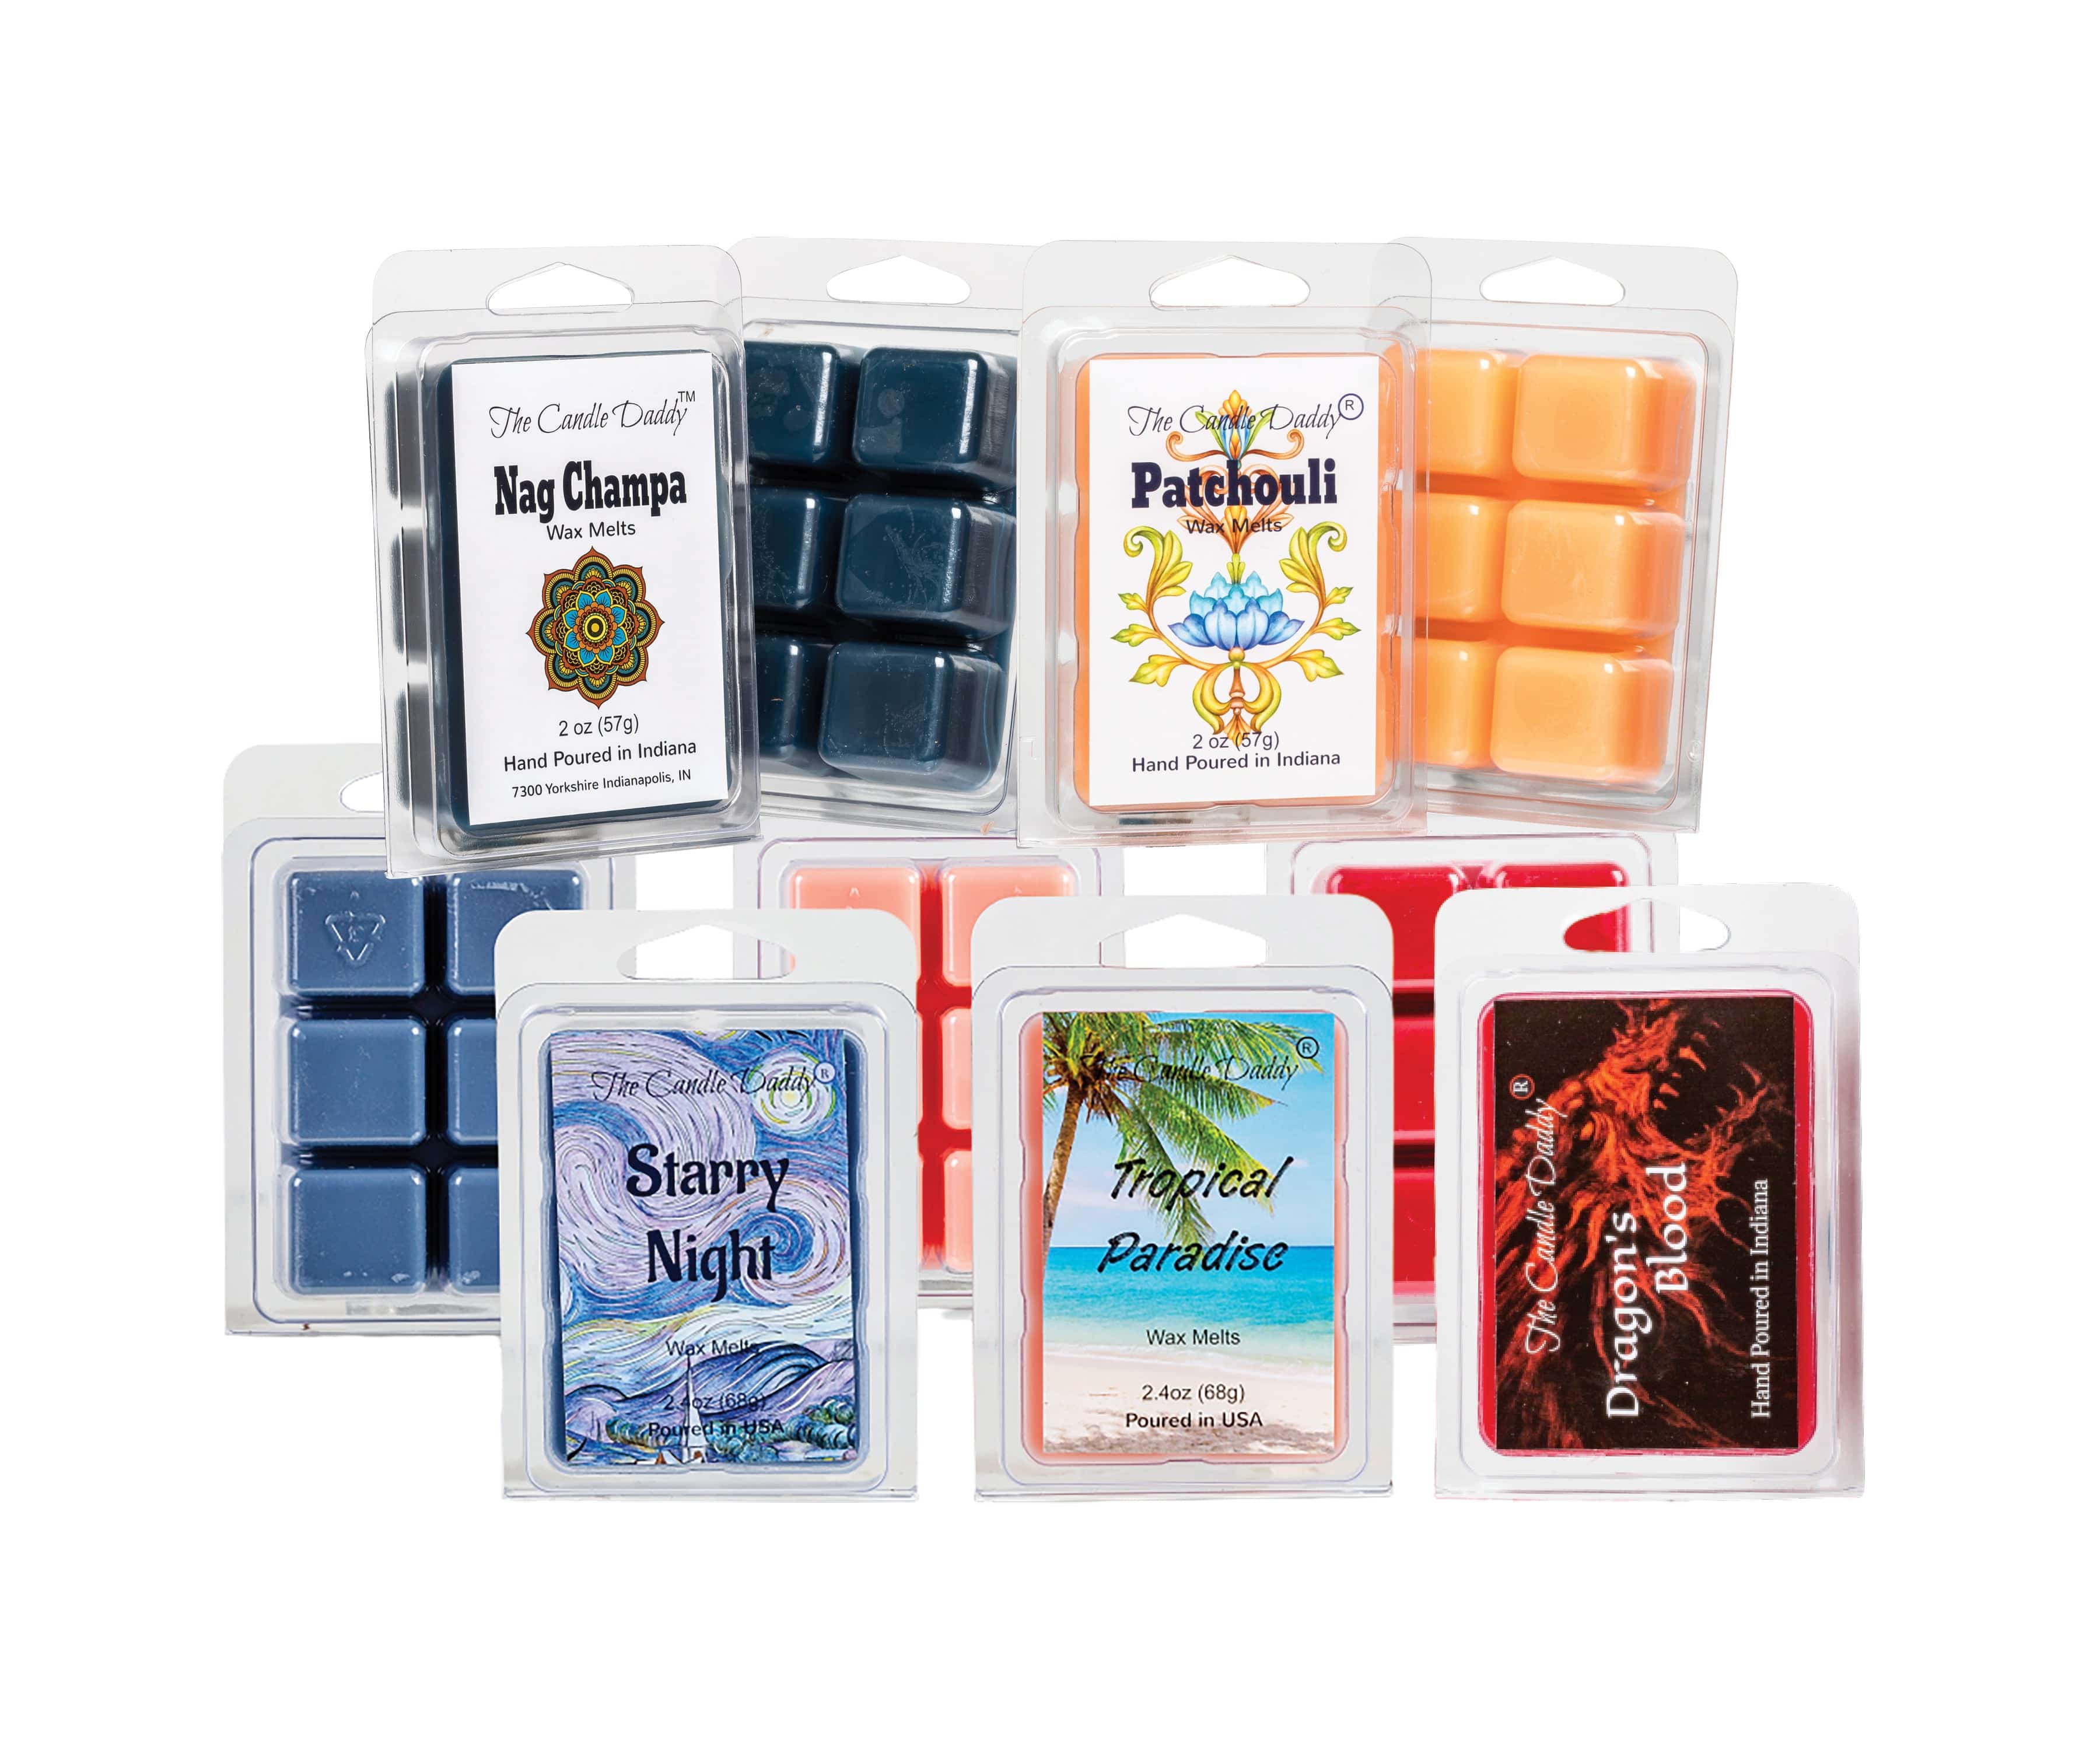 Eco Aroma Coco-Soy Candles, 6 Cubes (3 Oz Each)-Best Scentsy Wax Melts Wax  Cubes - Coconut Soy Wax Melts Candles with 100% Natural Essential Oils (2.